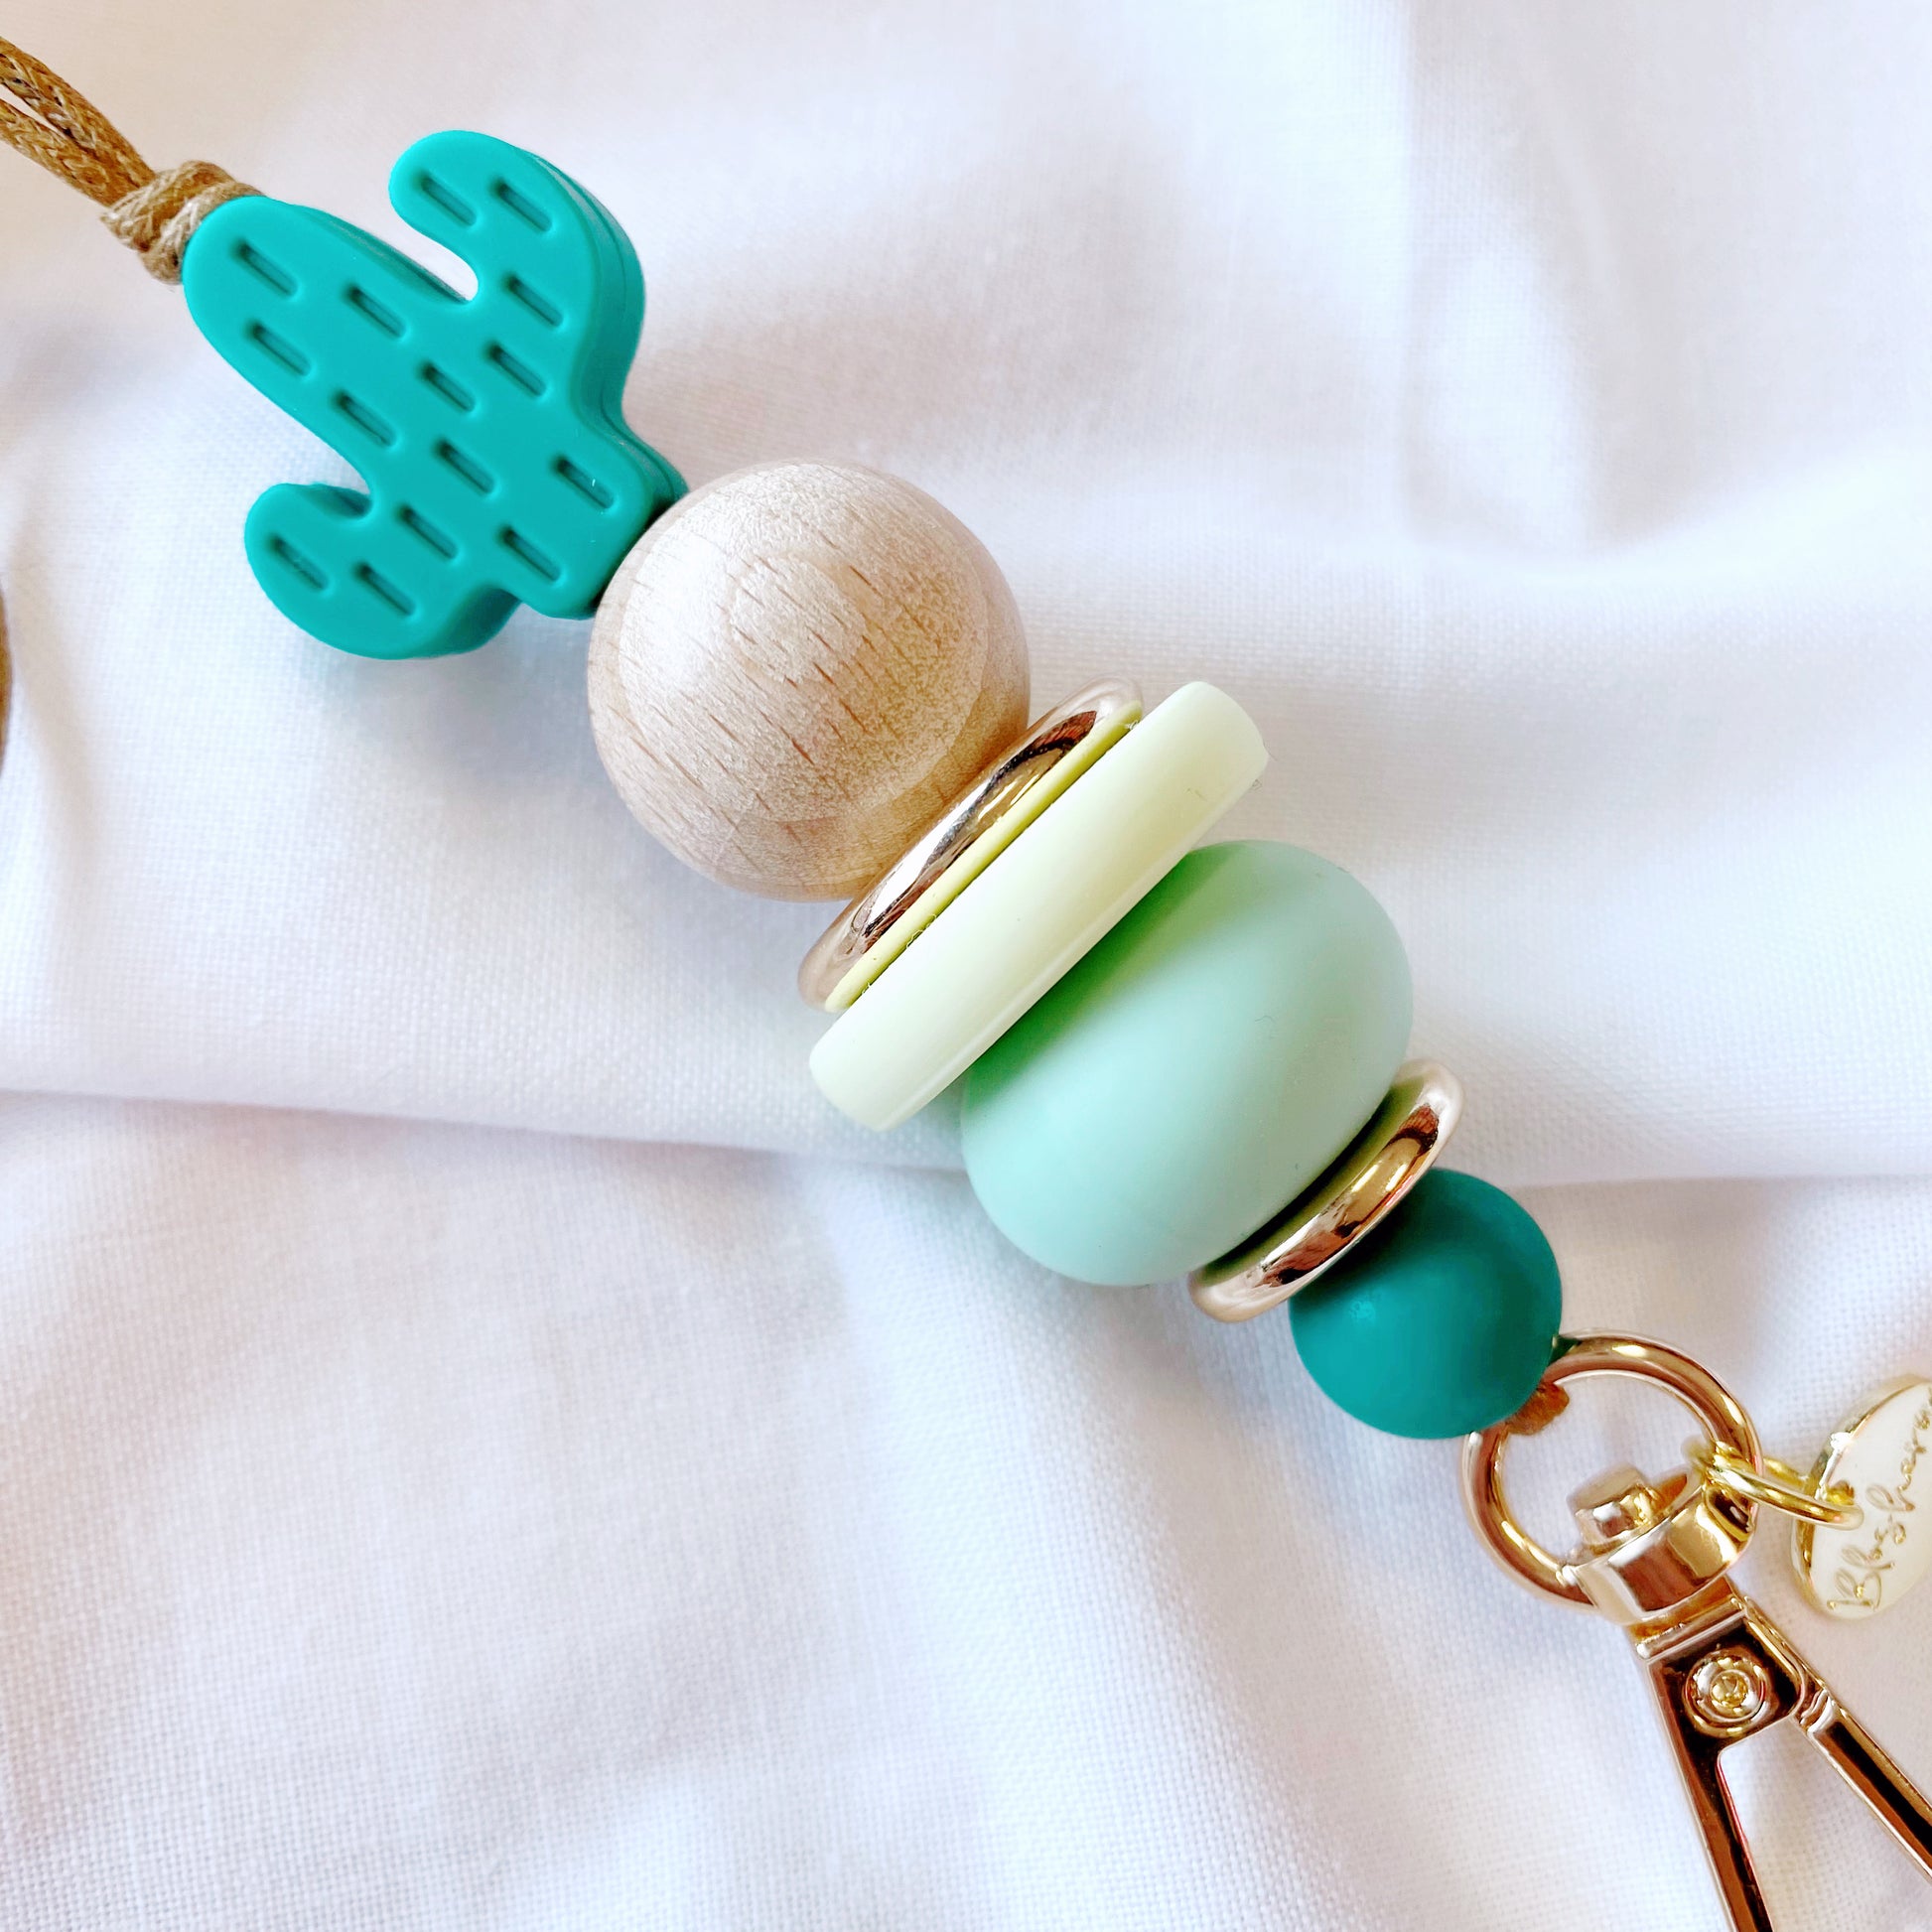 up close to the silicone beaded lanyard, showing mint, teal, green, wood and gold